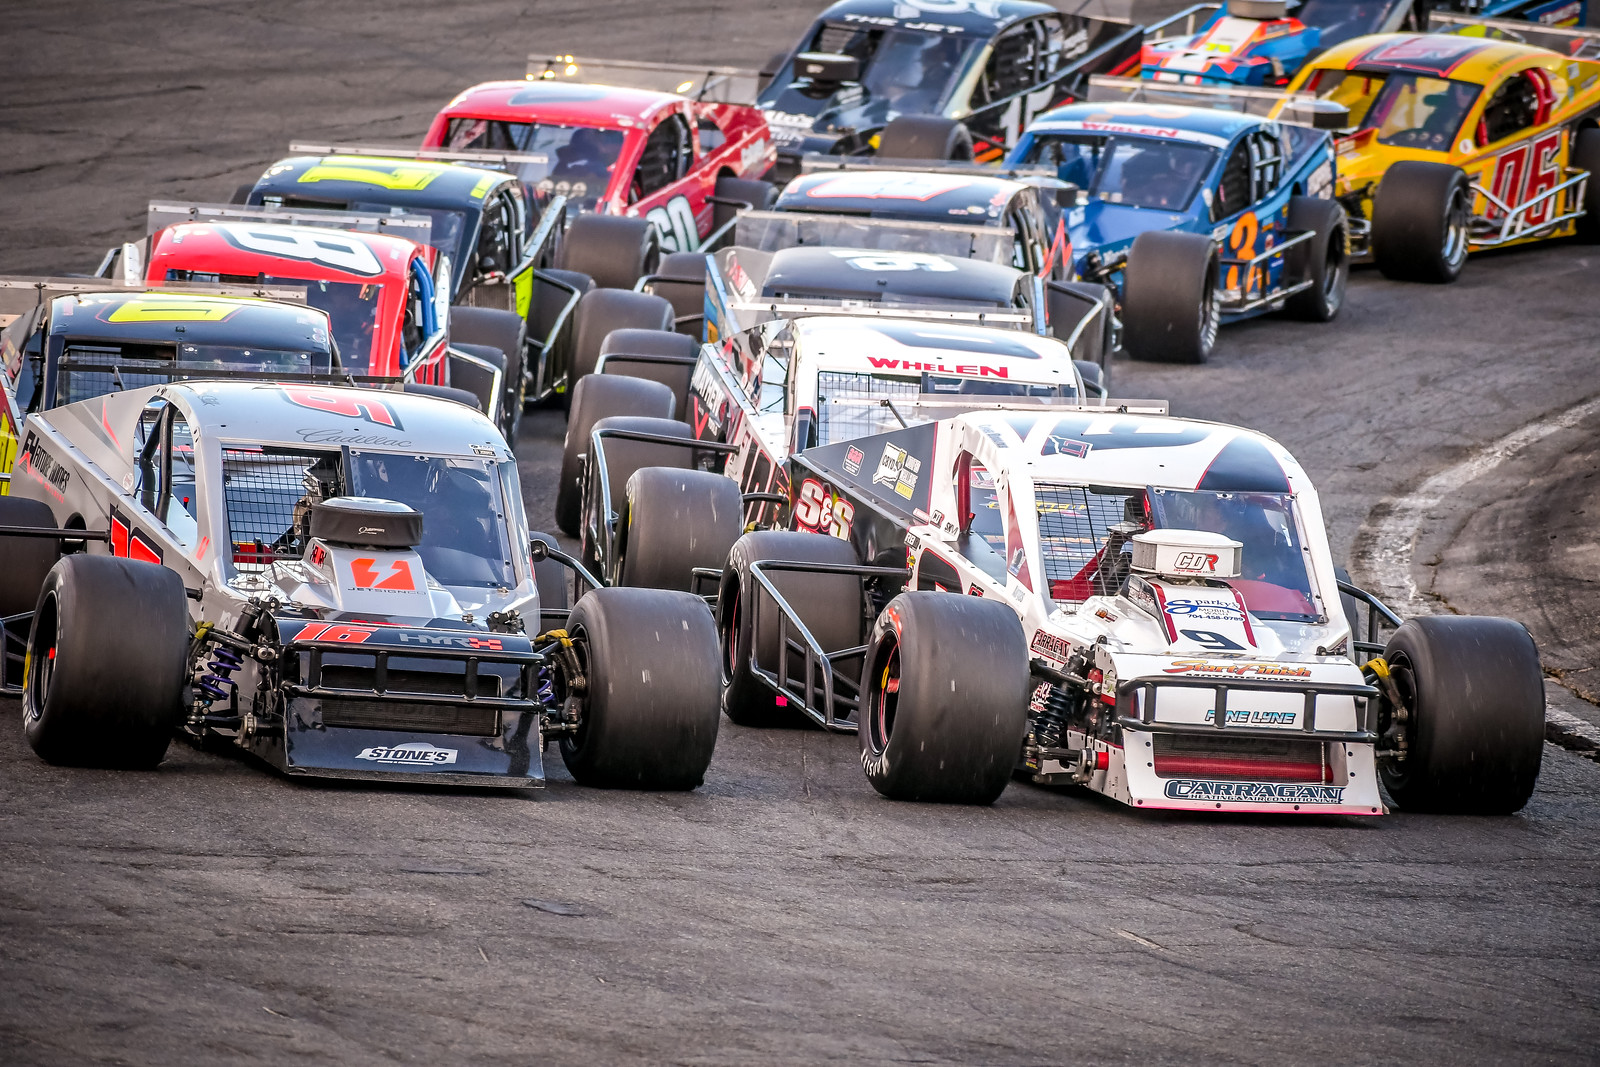 TRI TRACK RETURNING TO SEEKONK SPEEDWAY WITH TWO DATES IN 2022